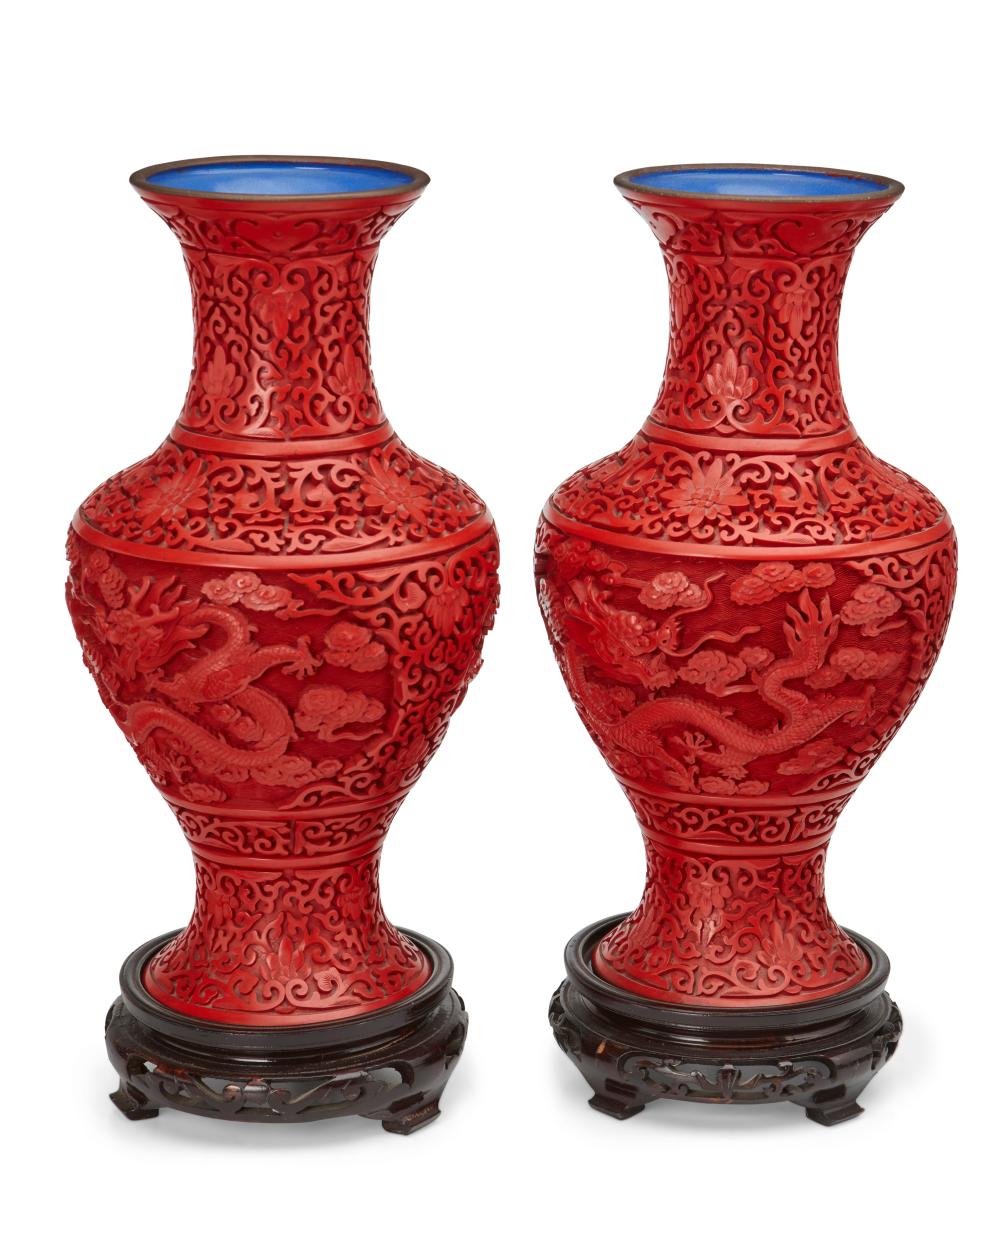 A PAIR OF CHINESE CINNABAR-STYLE